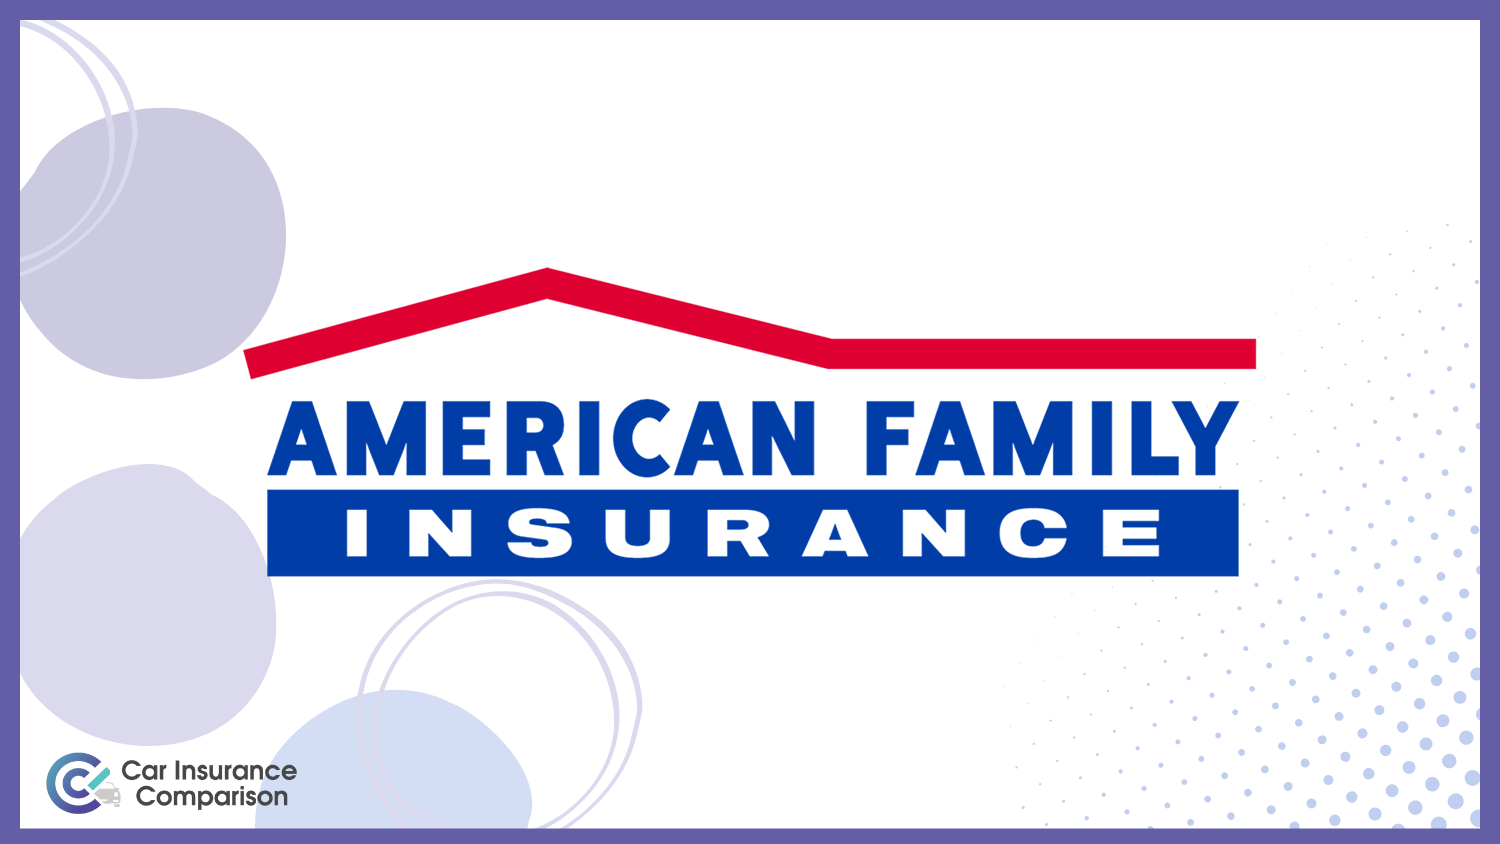 American Family: Compare Car Insurance Rates for First-time Drivers